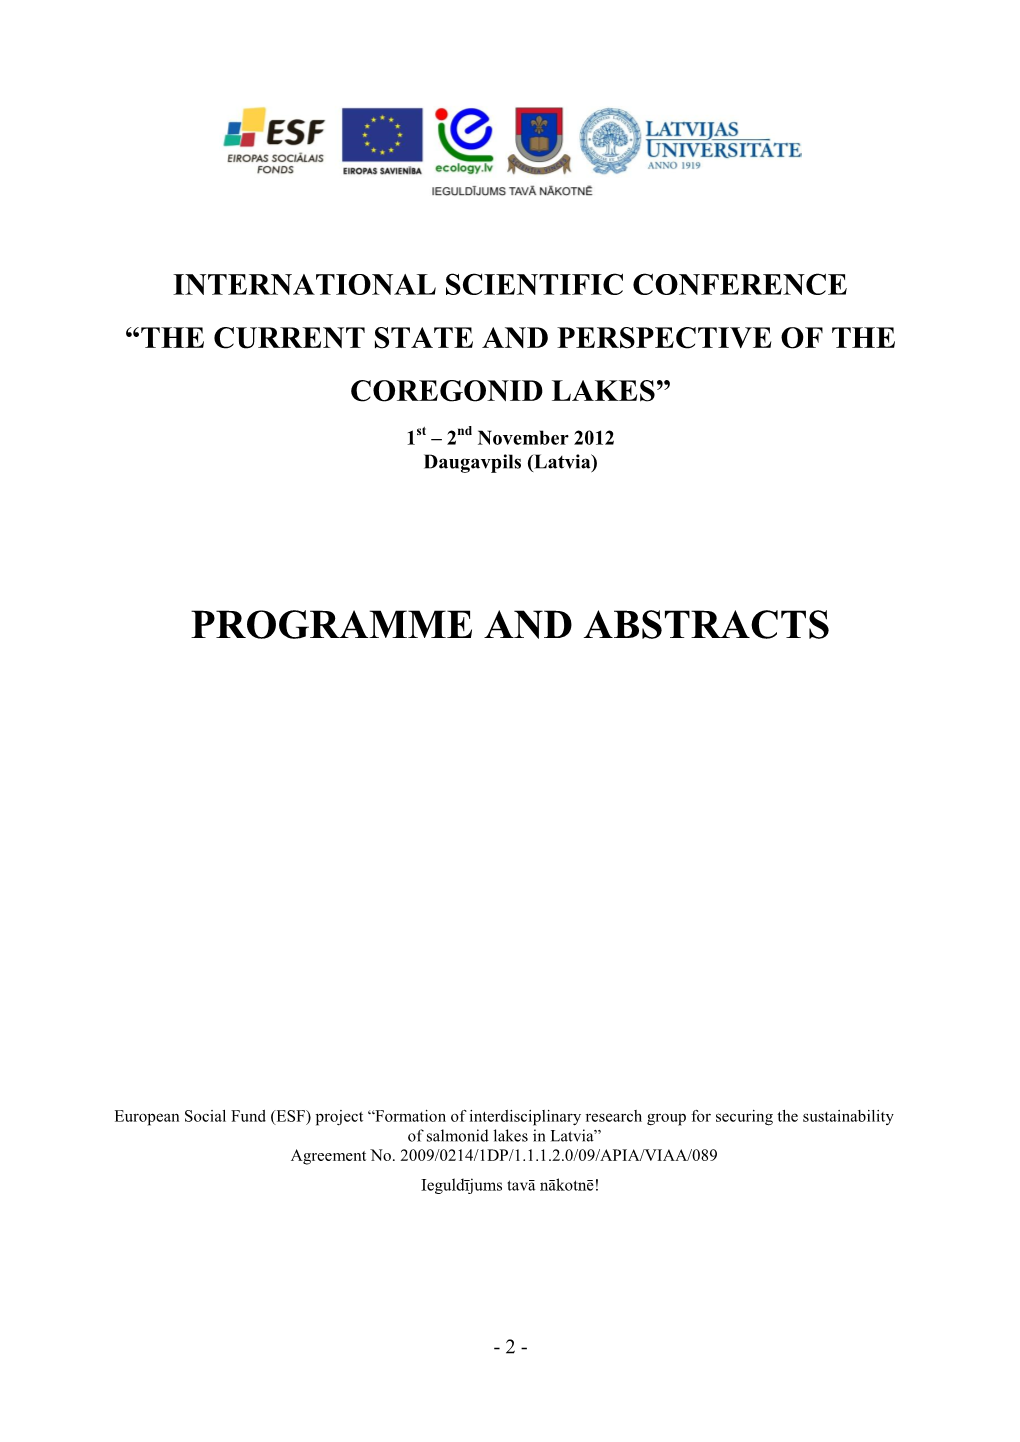 International Scientific Conference“The Current State and Perspective of the Coregonid Lakes” November 1 – 2, 2012